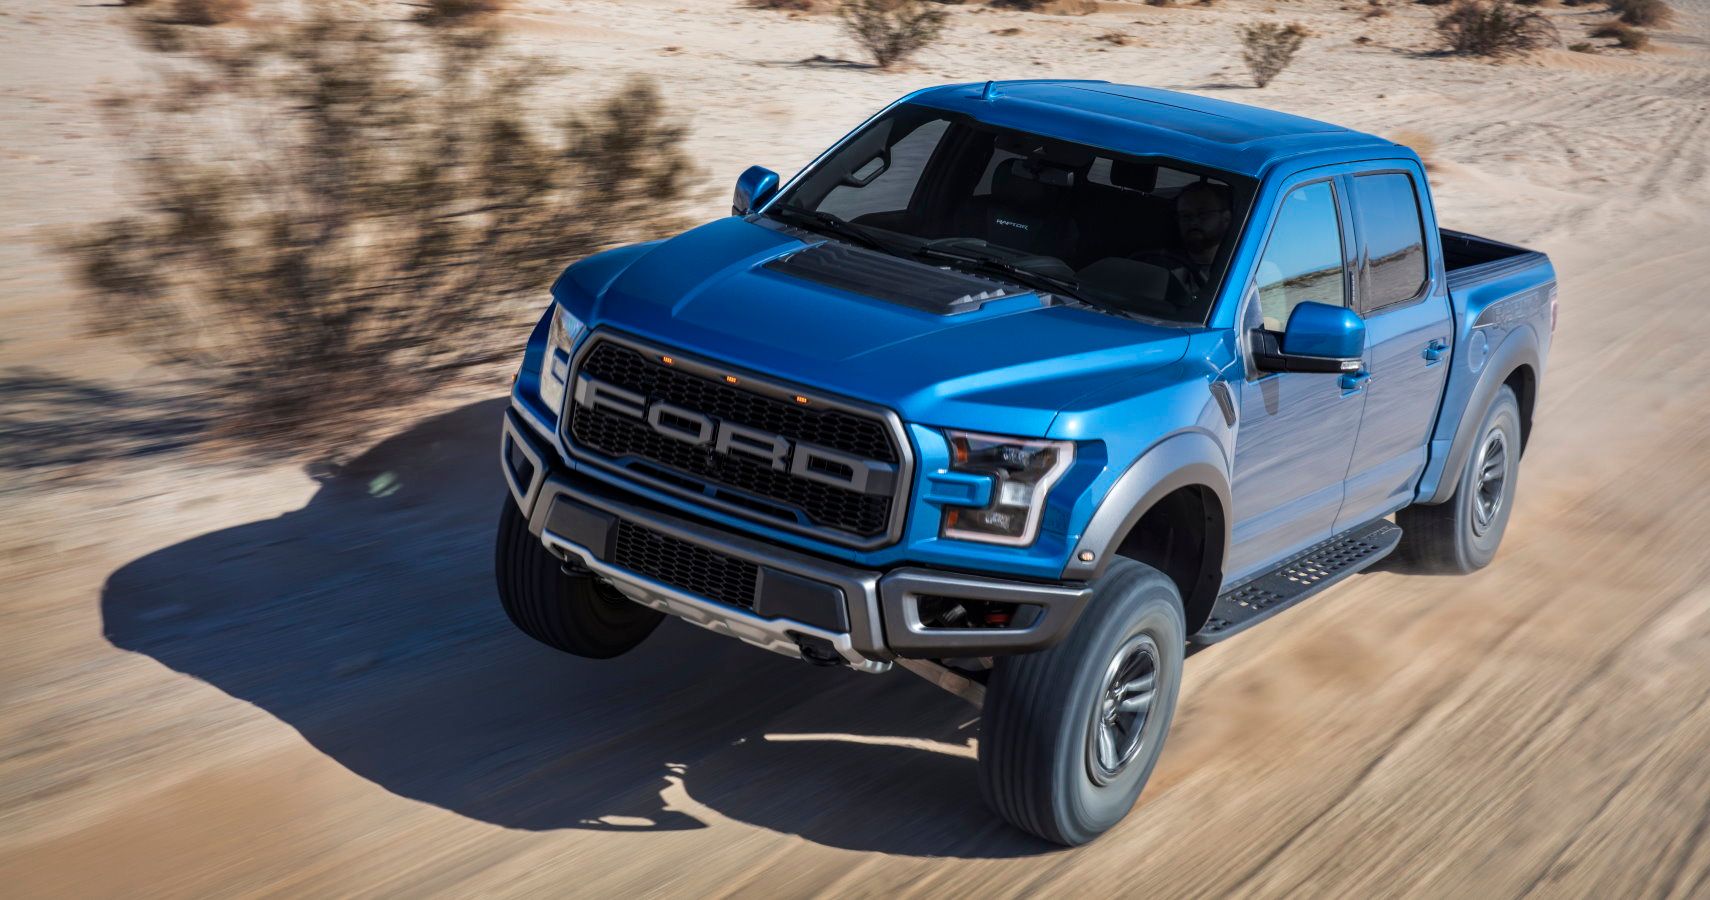 Ford Raptor Shows Just How Fast It Can Go In Top Speed Test